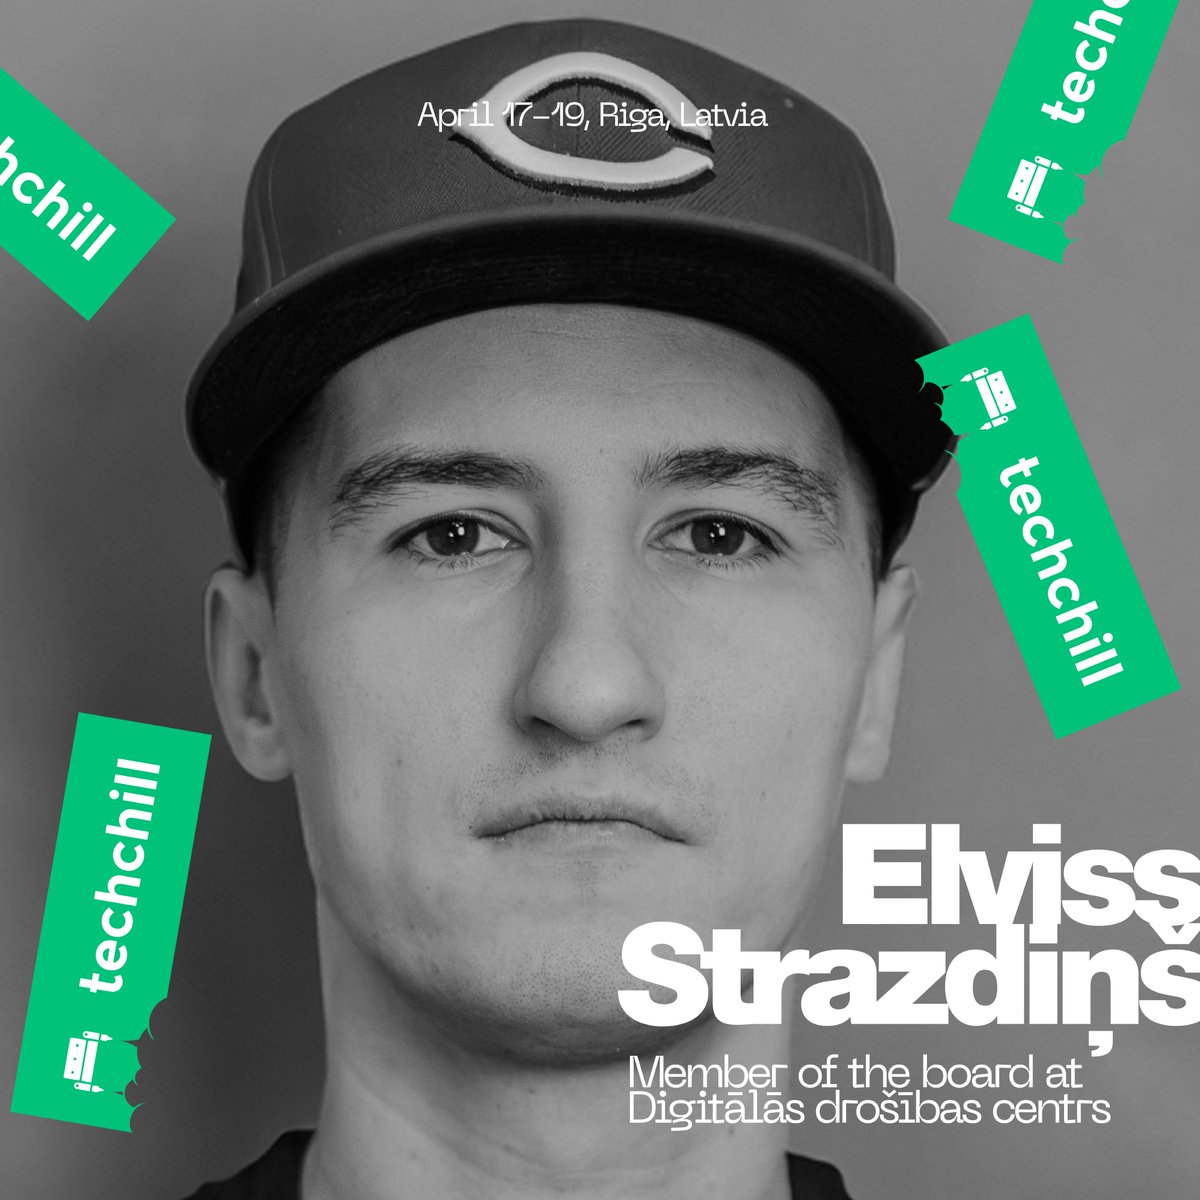 Excited to have @elnormous, Digital Security Expert & Founder of Digital Security Center, speaking at TechChill 2024! Don't miss his engaging insights in Riga, April 17-19! 🚀 Get your tickets: techchill.co/get-pass